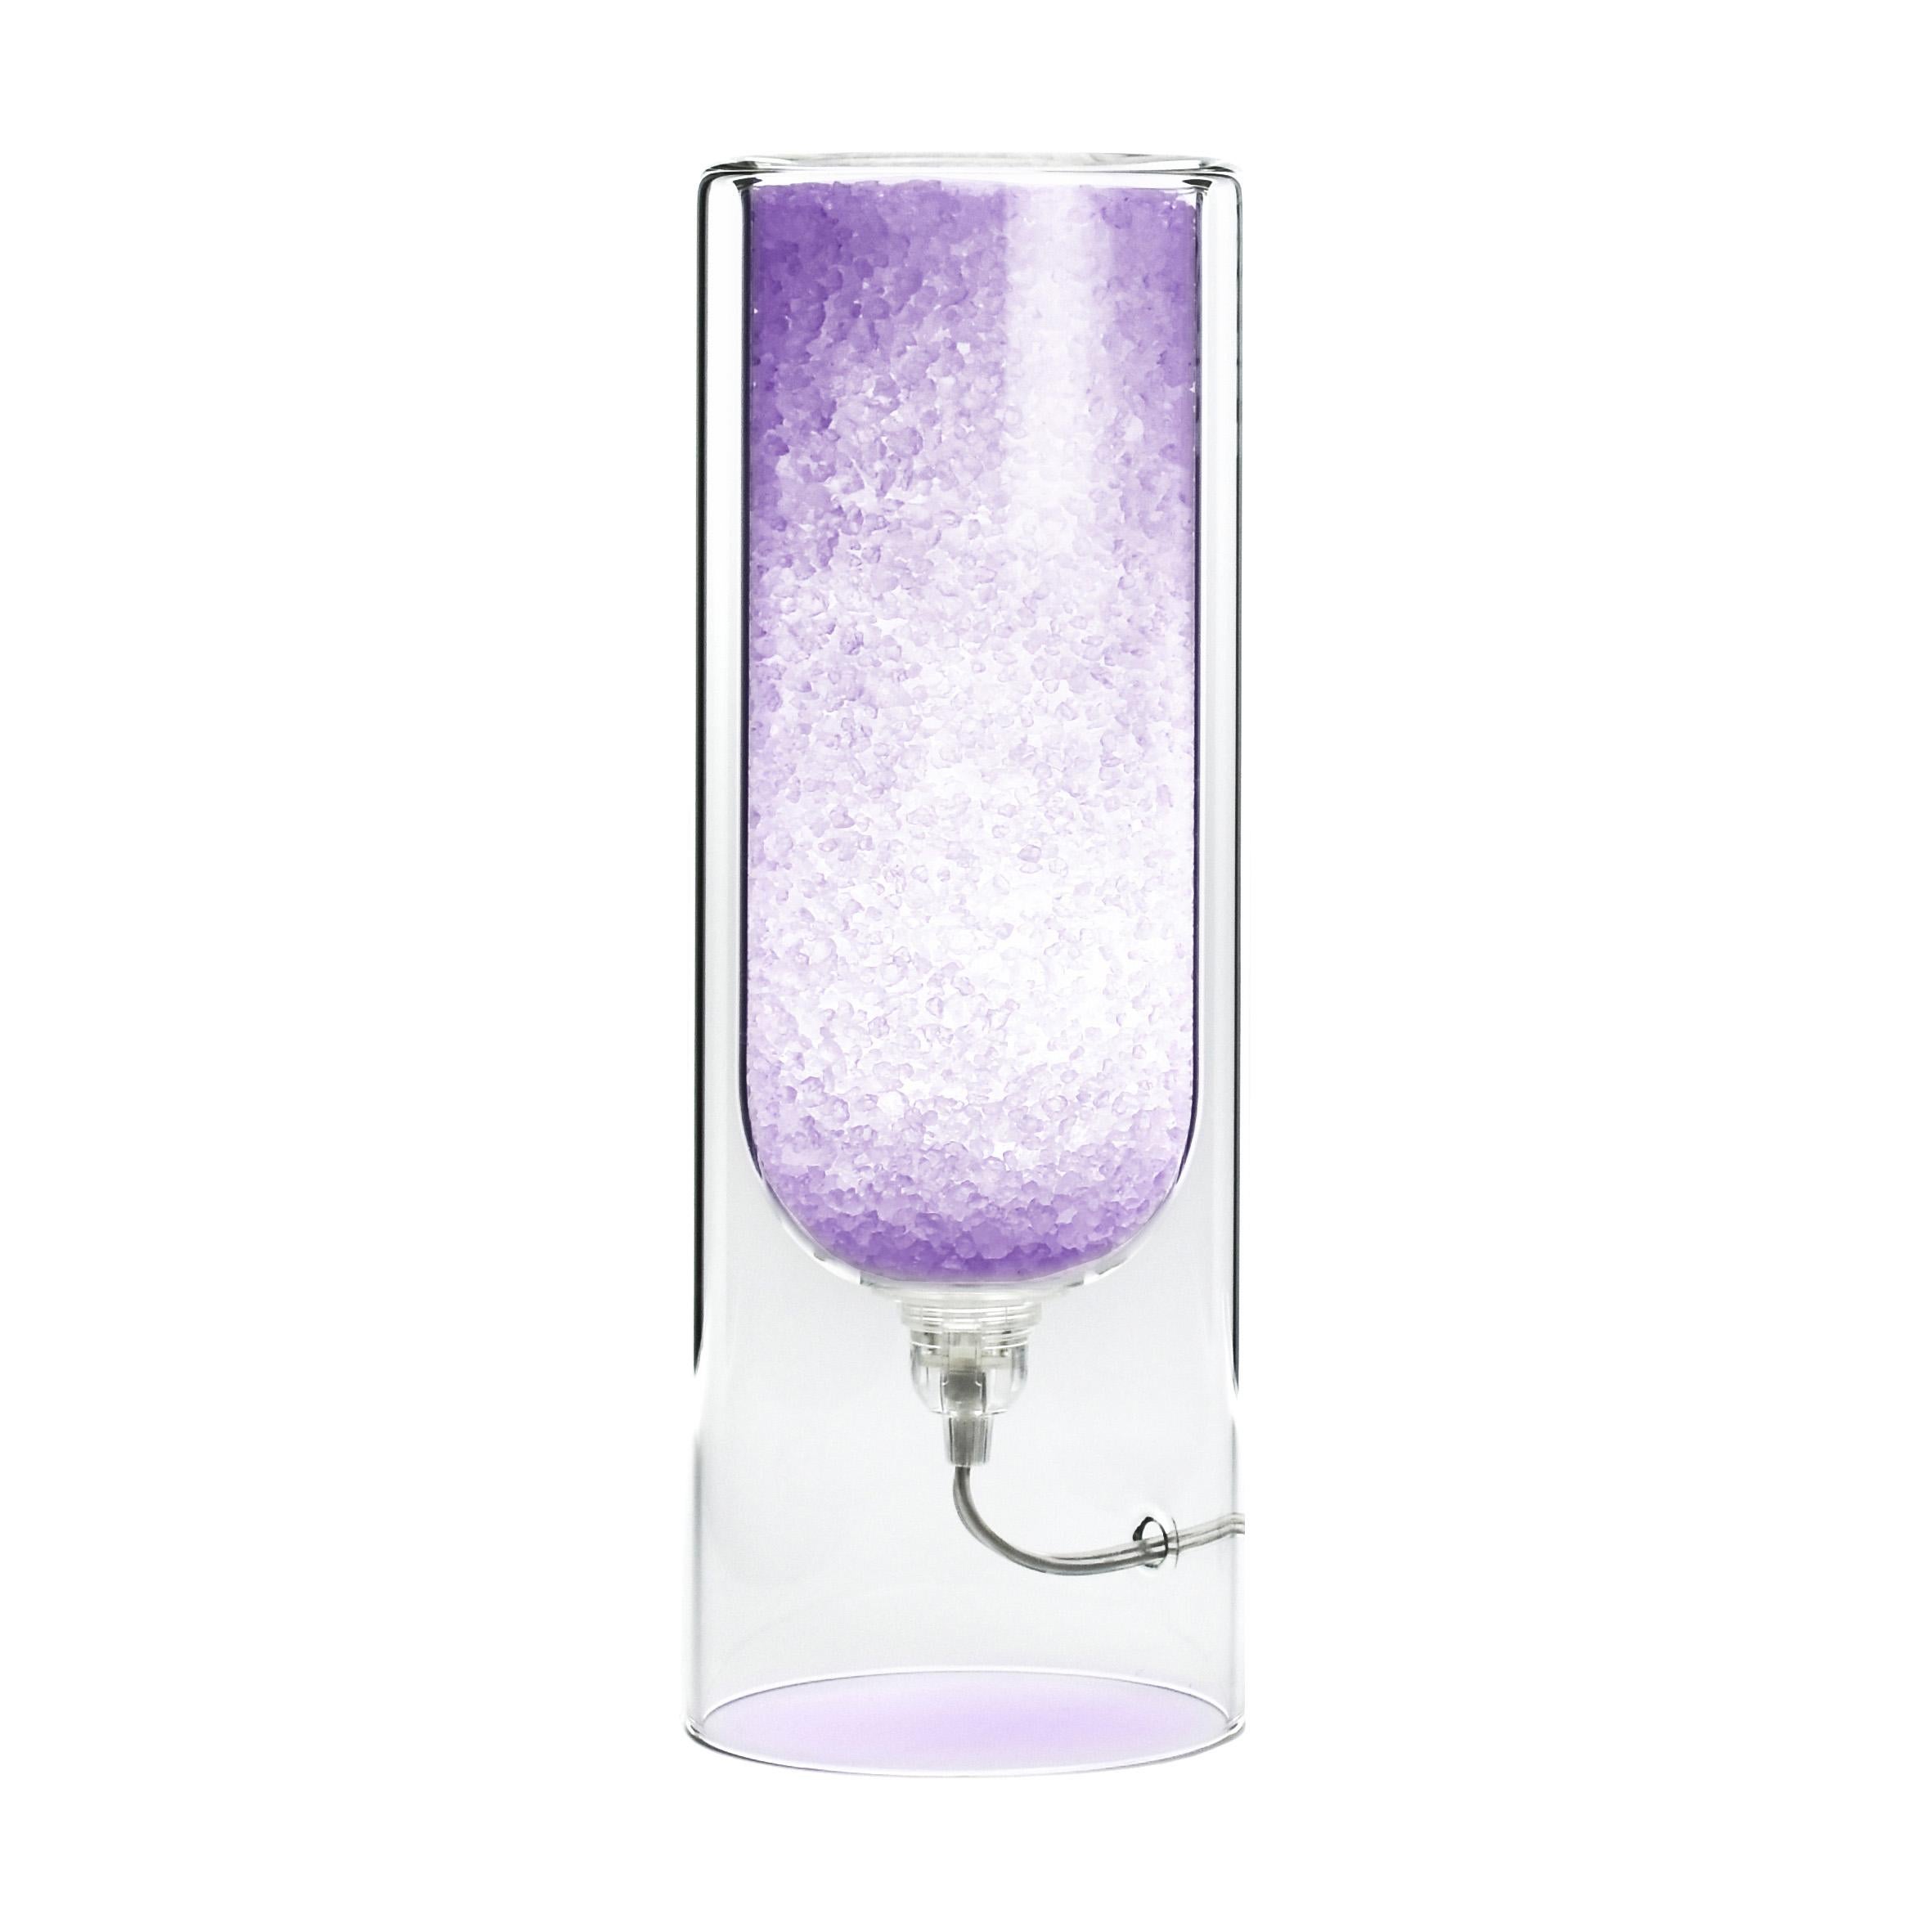 Violet Rocklumìna XXS table lamp by Coki Barbieri.
Dimensions: W 12 x D 12 x H 33.5 cm.
Materials: Italian rock salt crystals colored with natural pigments, mineral pigments from Italian soil and borosilicate glass.

All our lamps can be wired